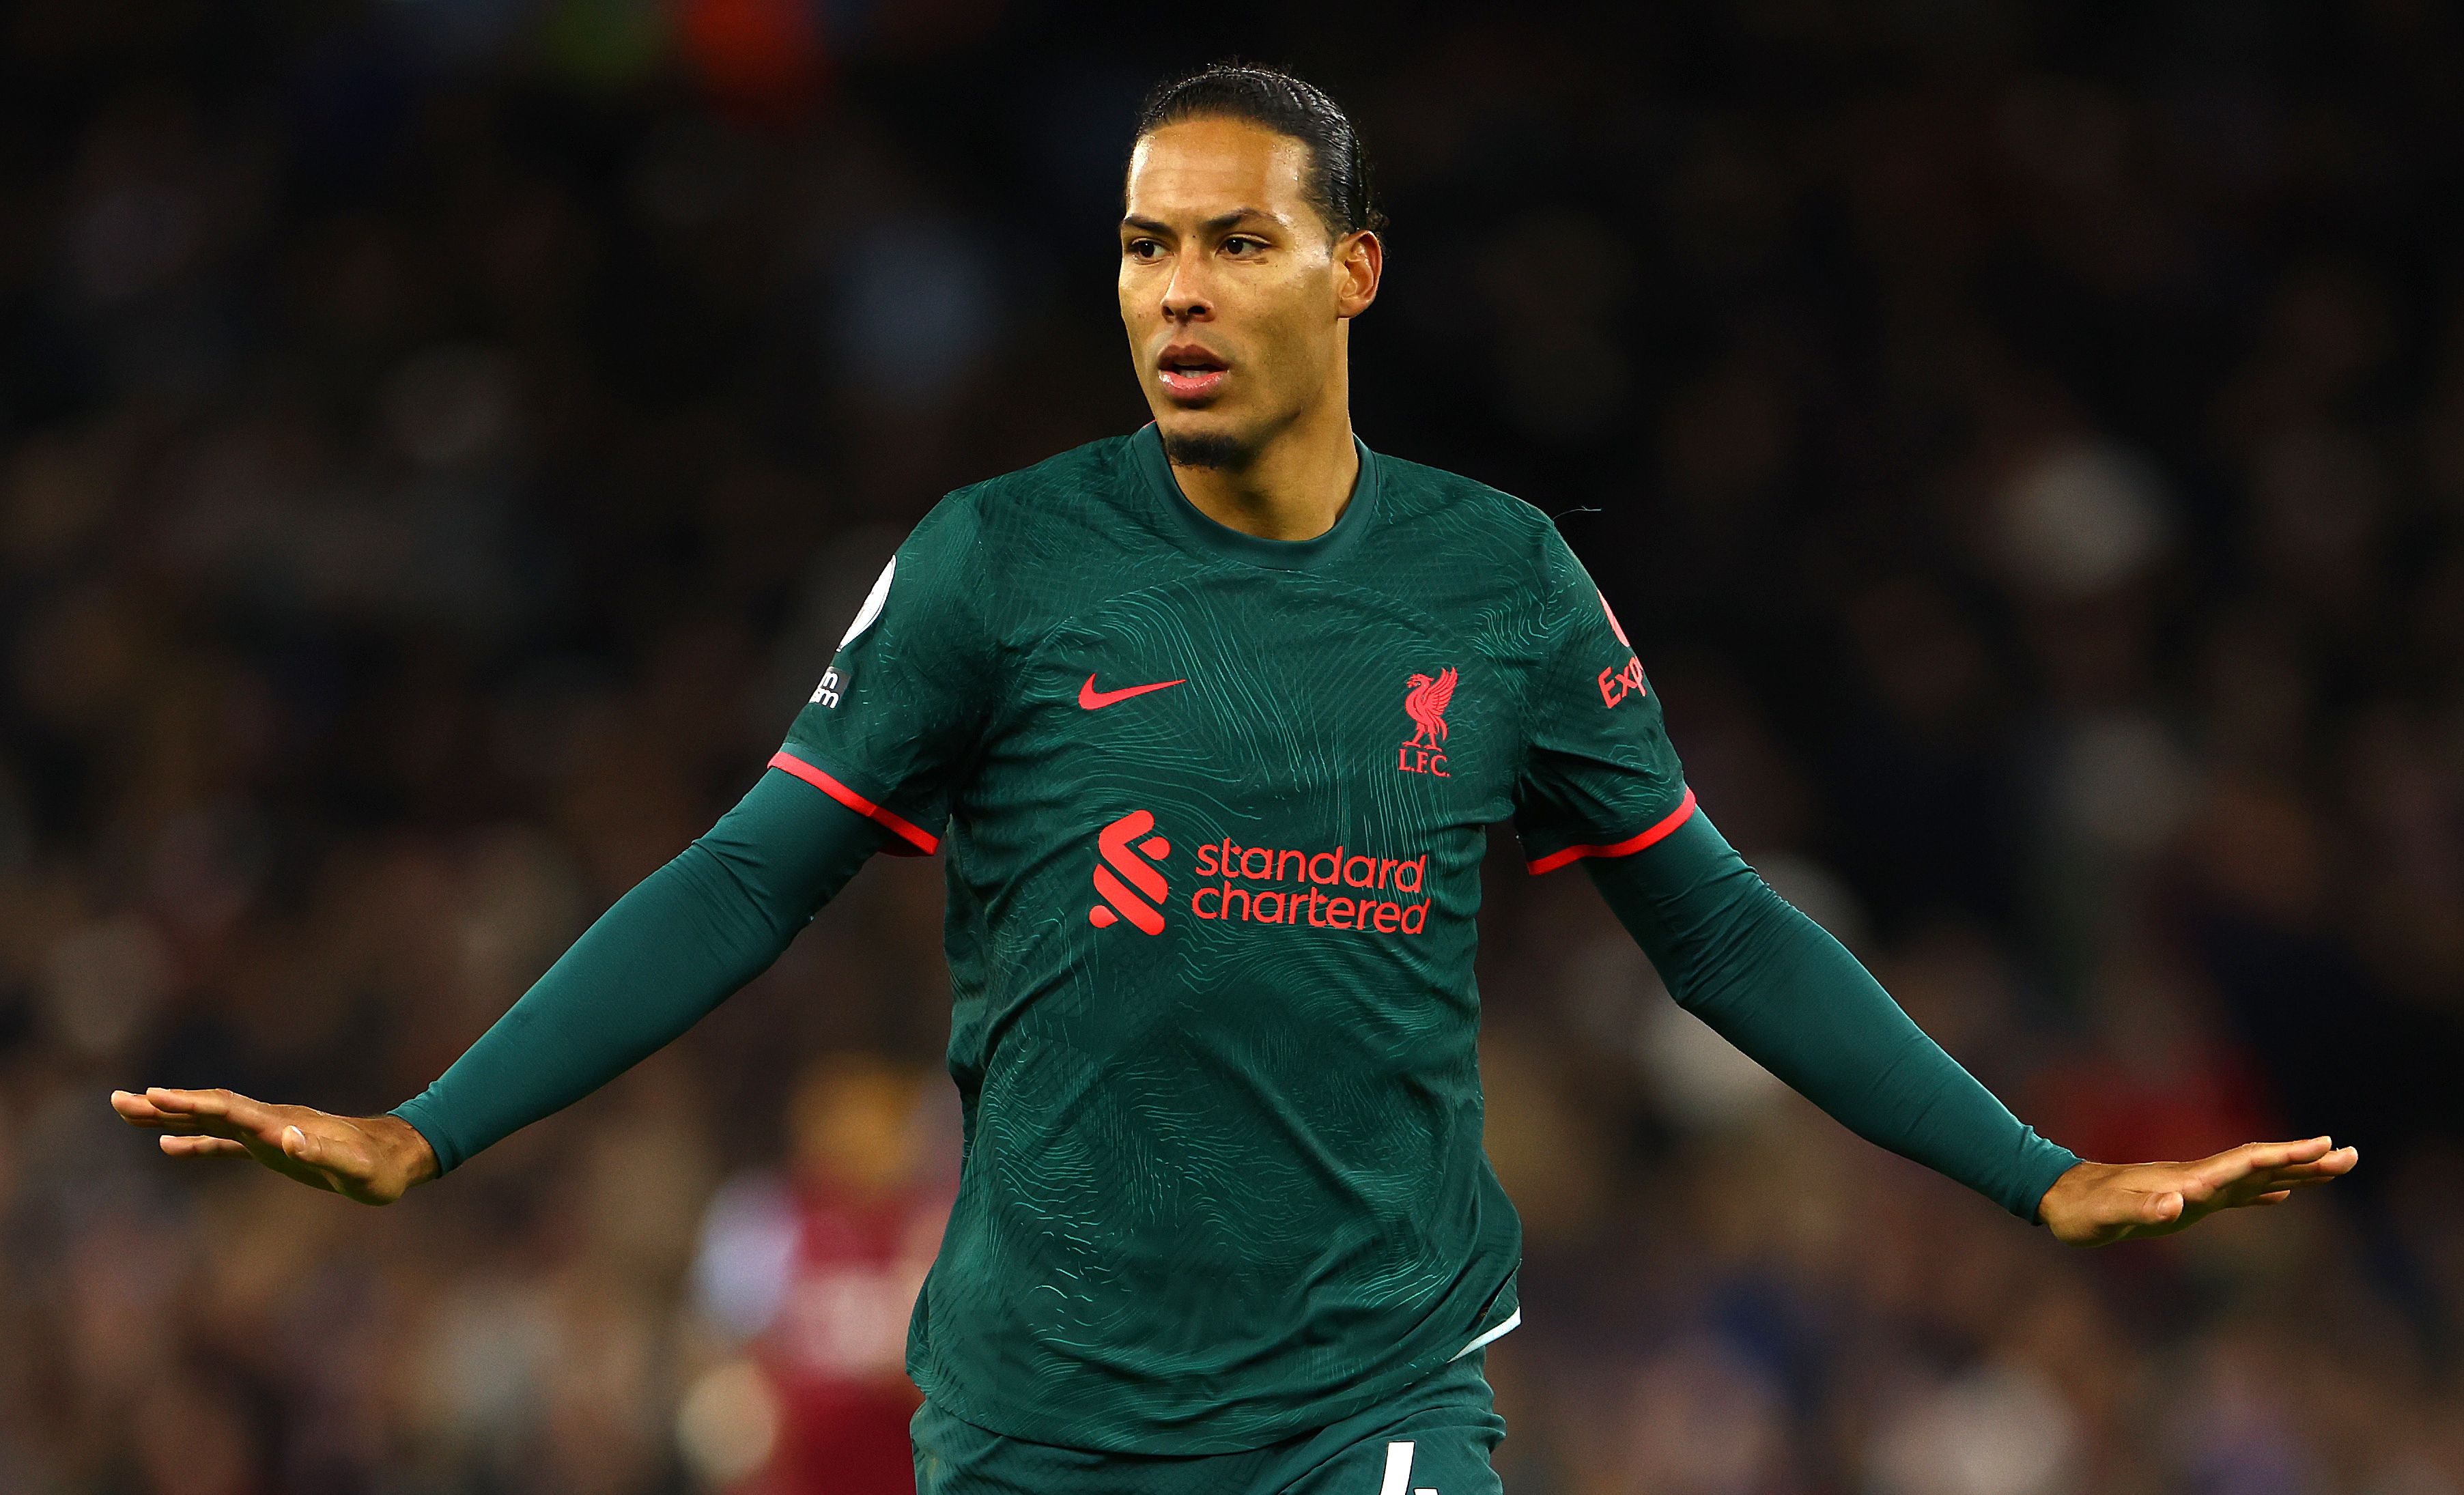 BIRMINGHAM, ENGLAND - DECEMBER 26: Virgil van Dijk of Liverpool in action during the Premier League match between Aston Villa and Liverpool FC at Villa Park on December 26, 2022 in Birmingham, England. (Photo by Mark Thompson/Getty Images)